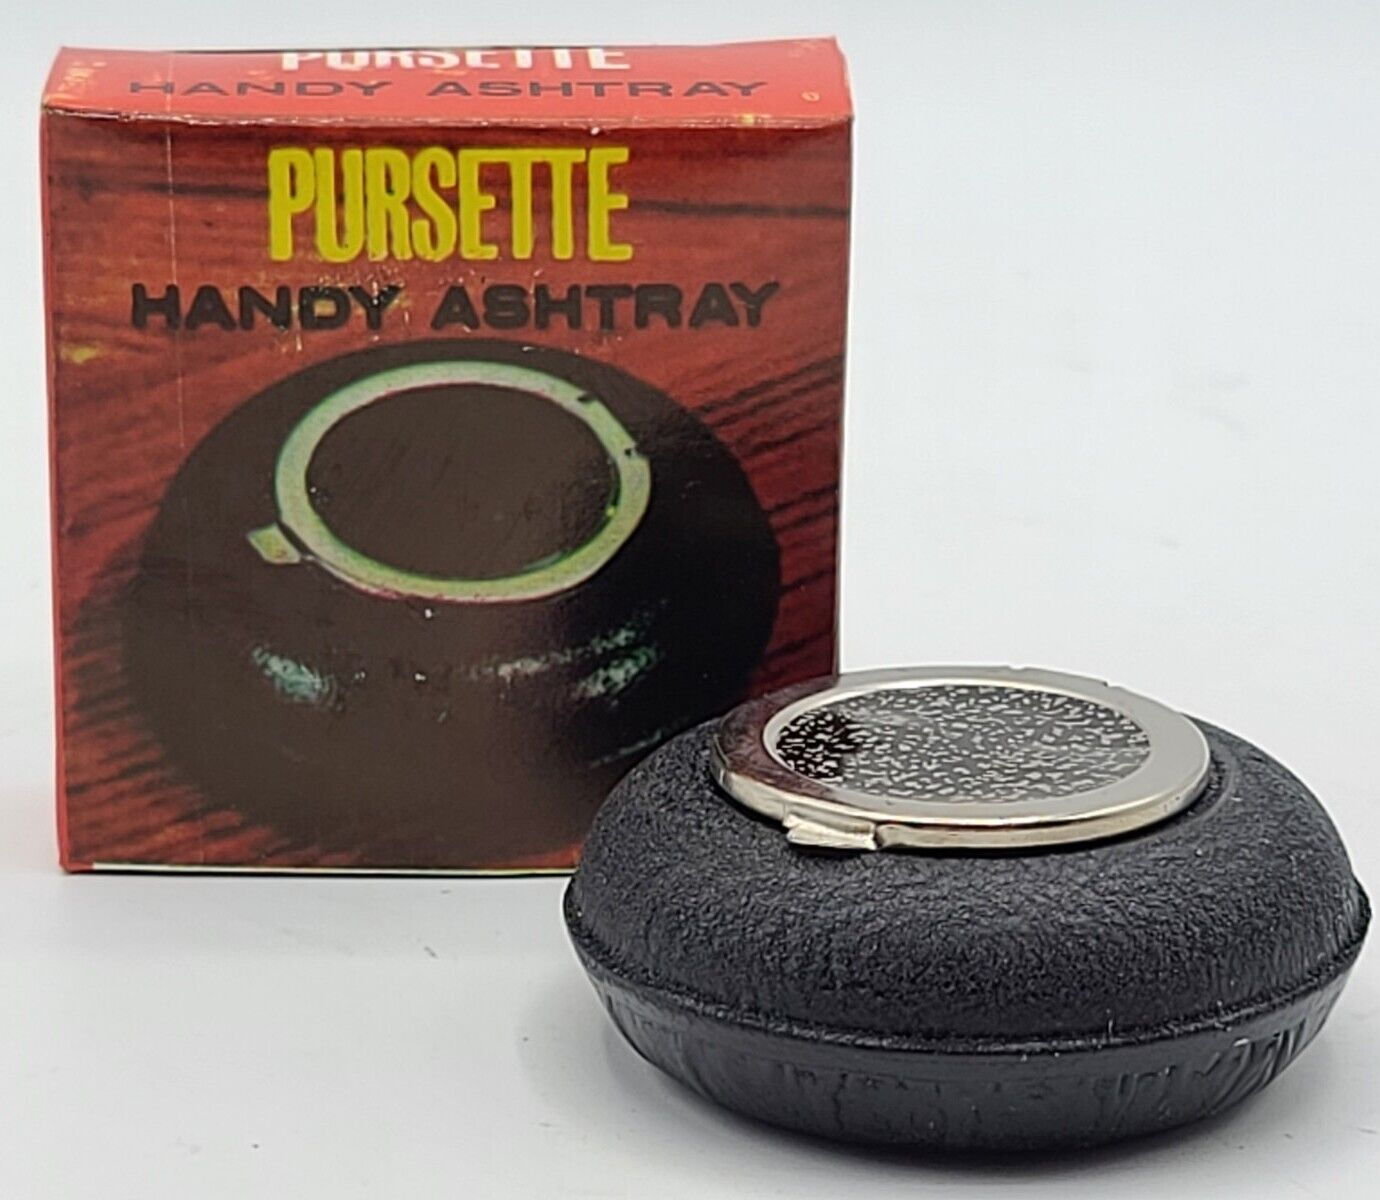 VINTAGE Pursette Handy Ashtray, BLACK ~ New Old Stock, Made in HONG KONG